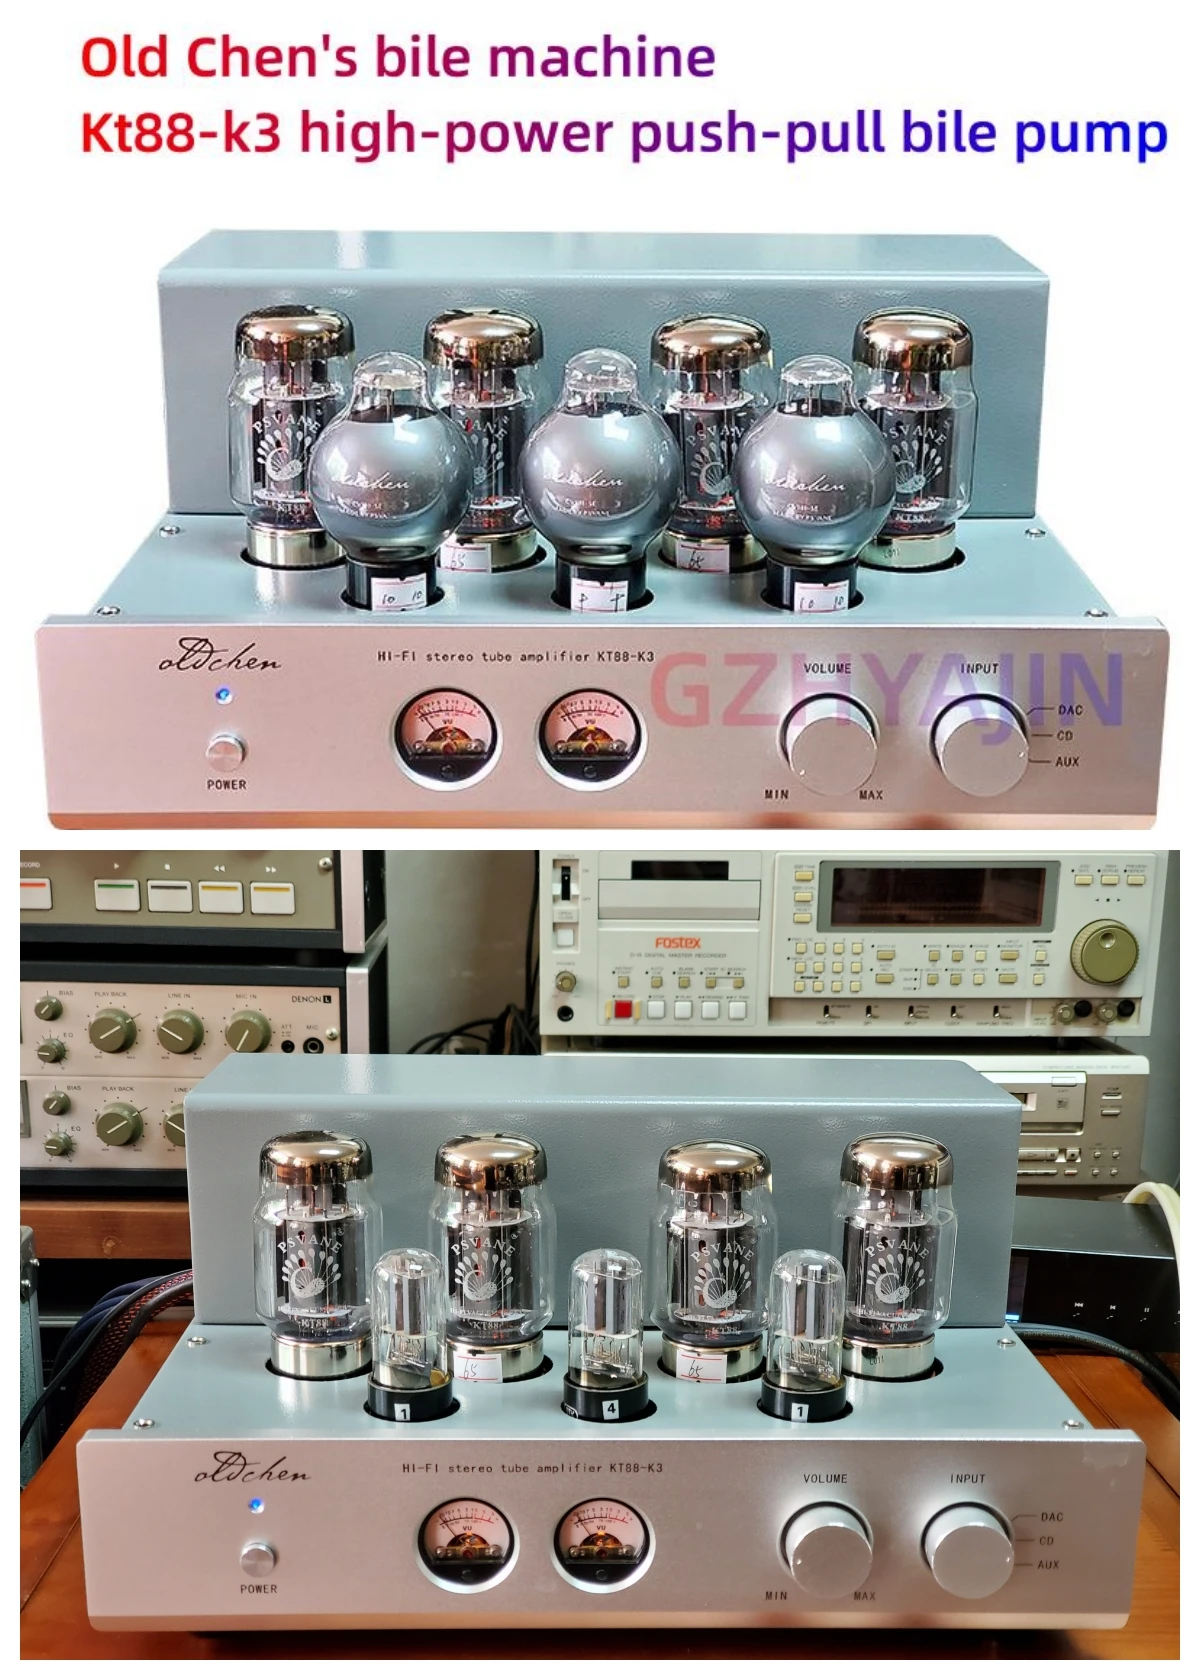 

New and old Chen bile machine kt88-k3 high-power push-pull bile machine manual construction fever electronic tube HiFi power amp